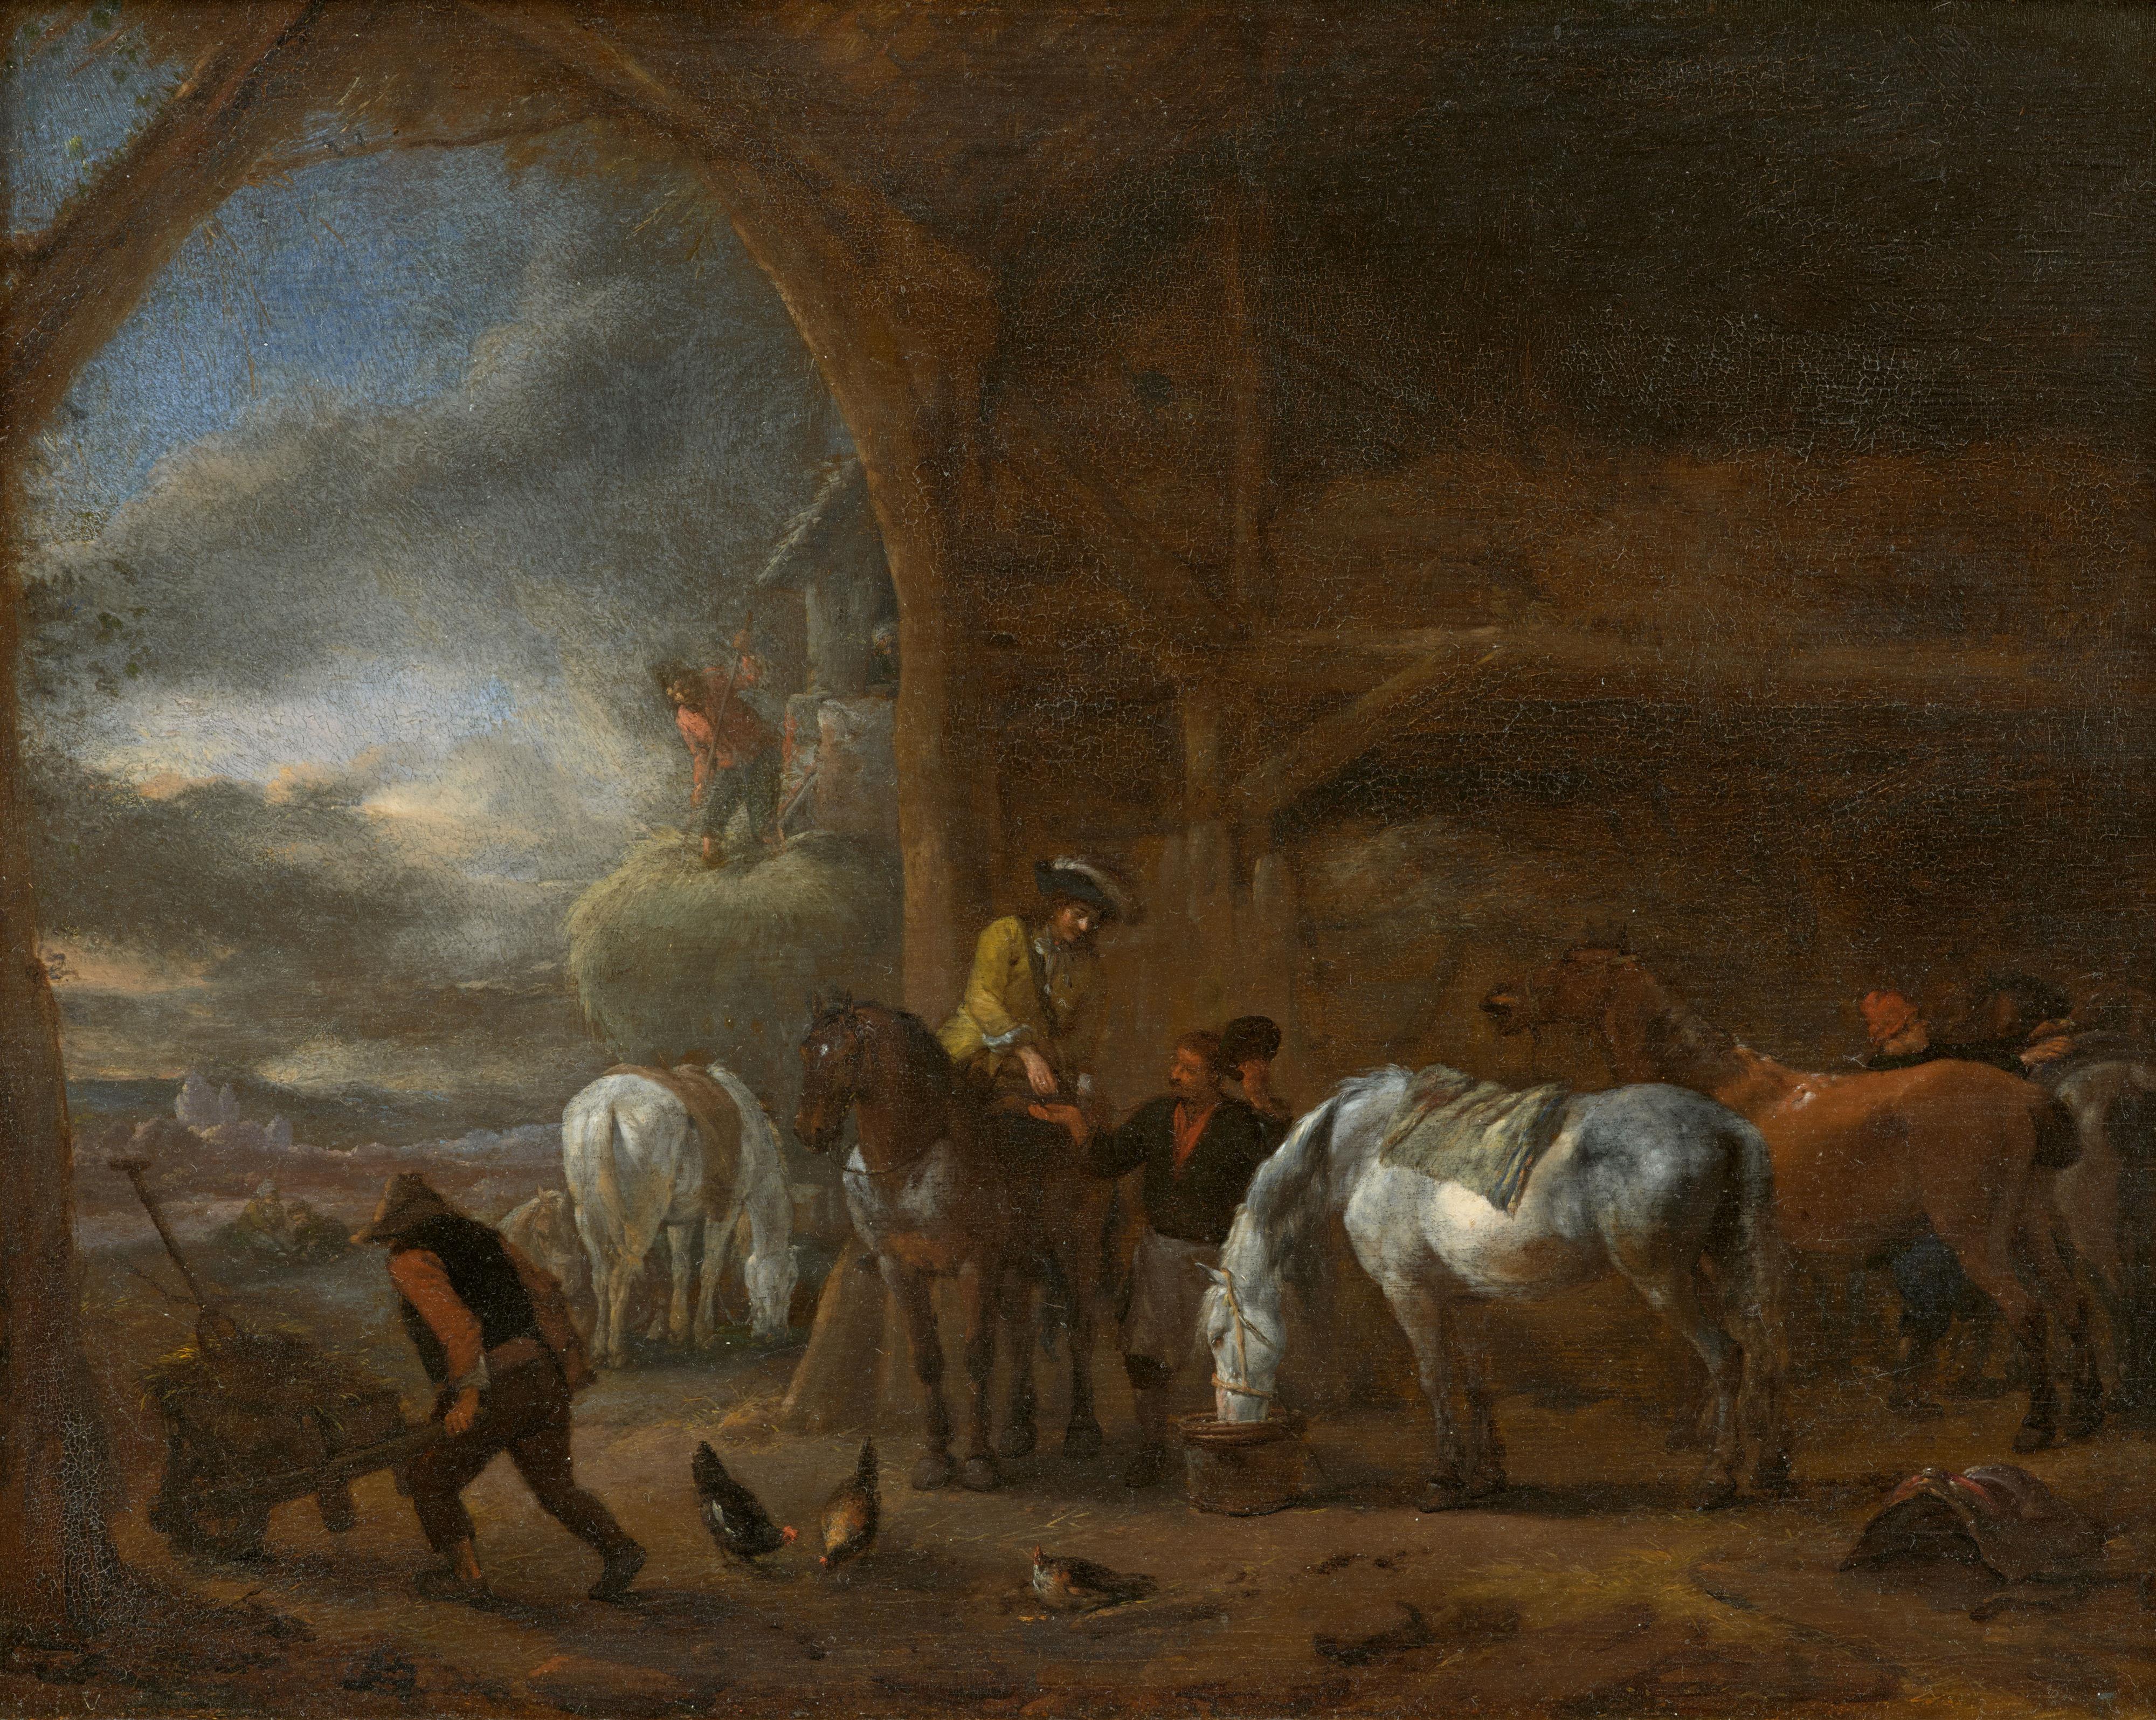 Philips Wouwerman - Interior of a Stable with Horsemen and Horses - image-1